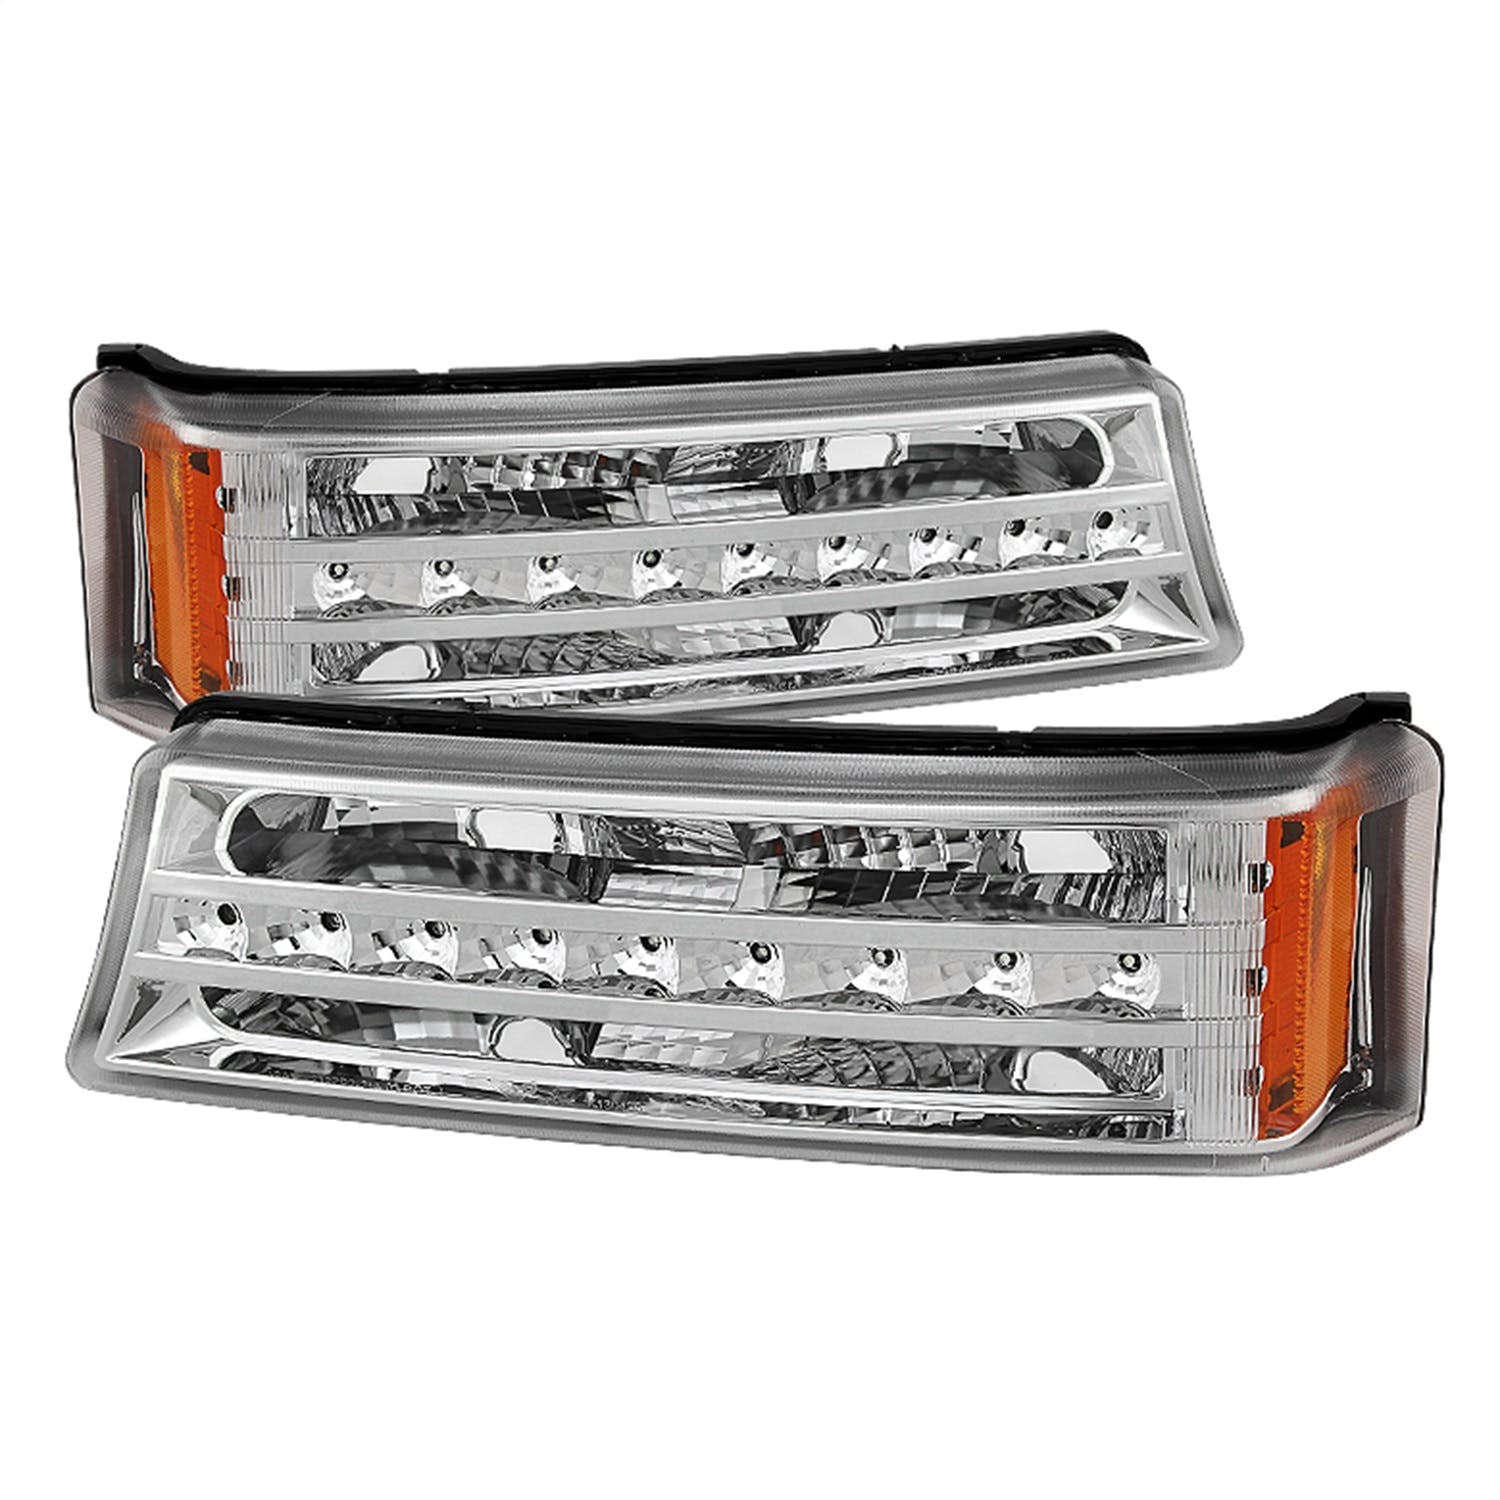 XTUNE POWER 9027499 Chevy Silverado 03 06 Avalanche 02 06 (Does Not fit with Body Cladding Models) LED Bumper Lights Chrome